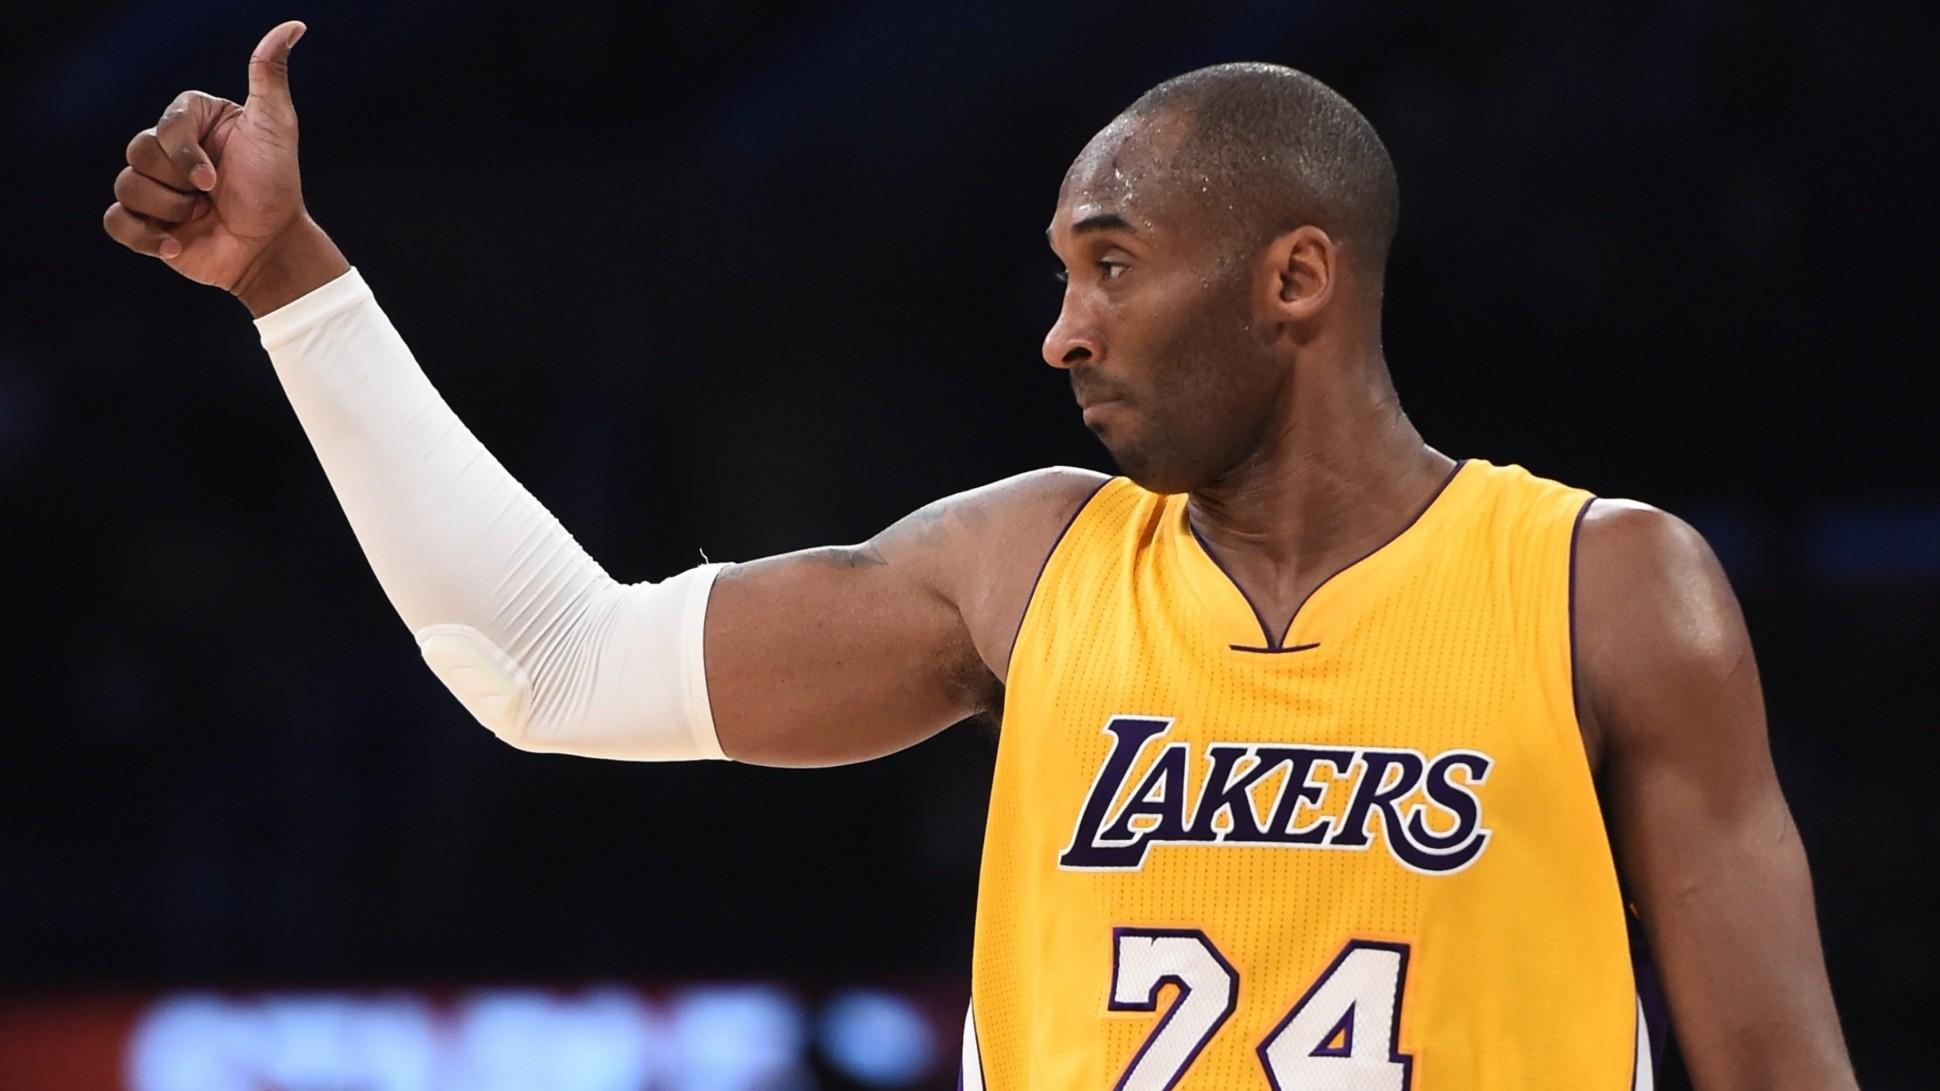 MMA Community in Shock As Kobe Bryant Passes Away in a